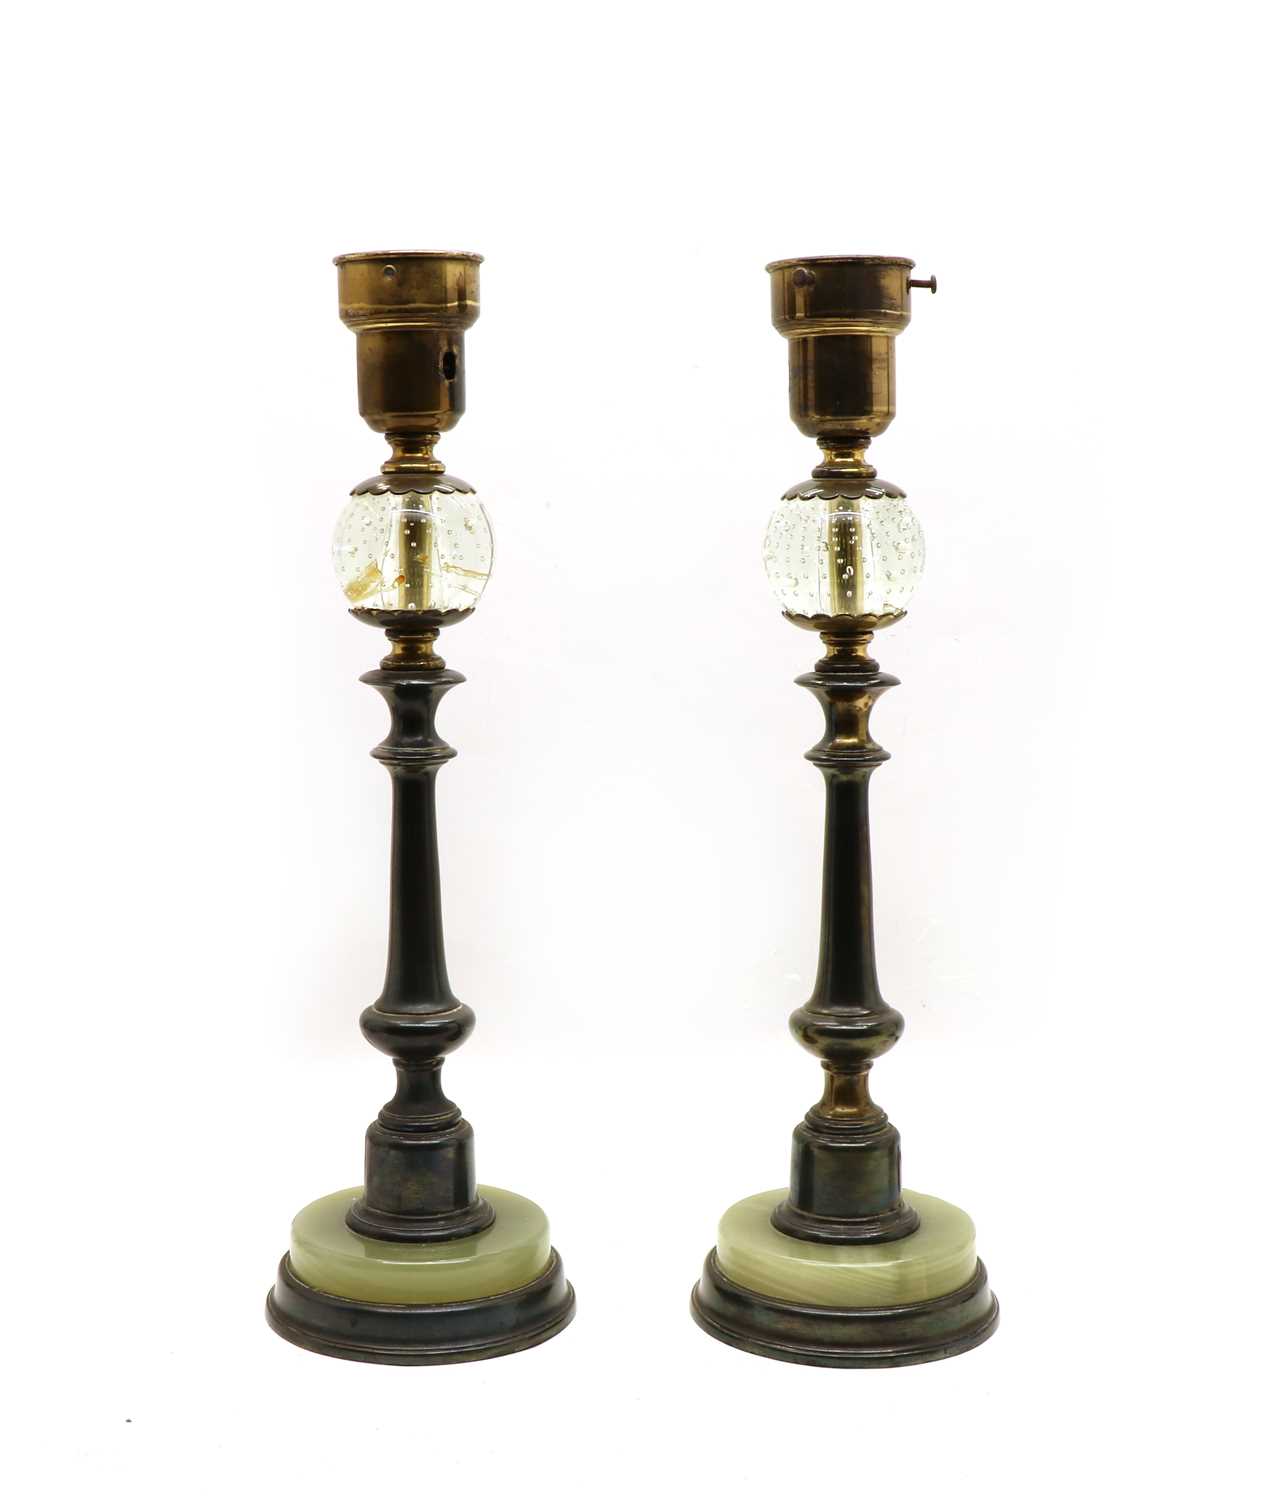 Lot 75 - An unusual pair of bronze onyx and glass table lamps